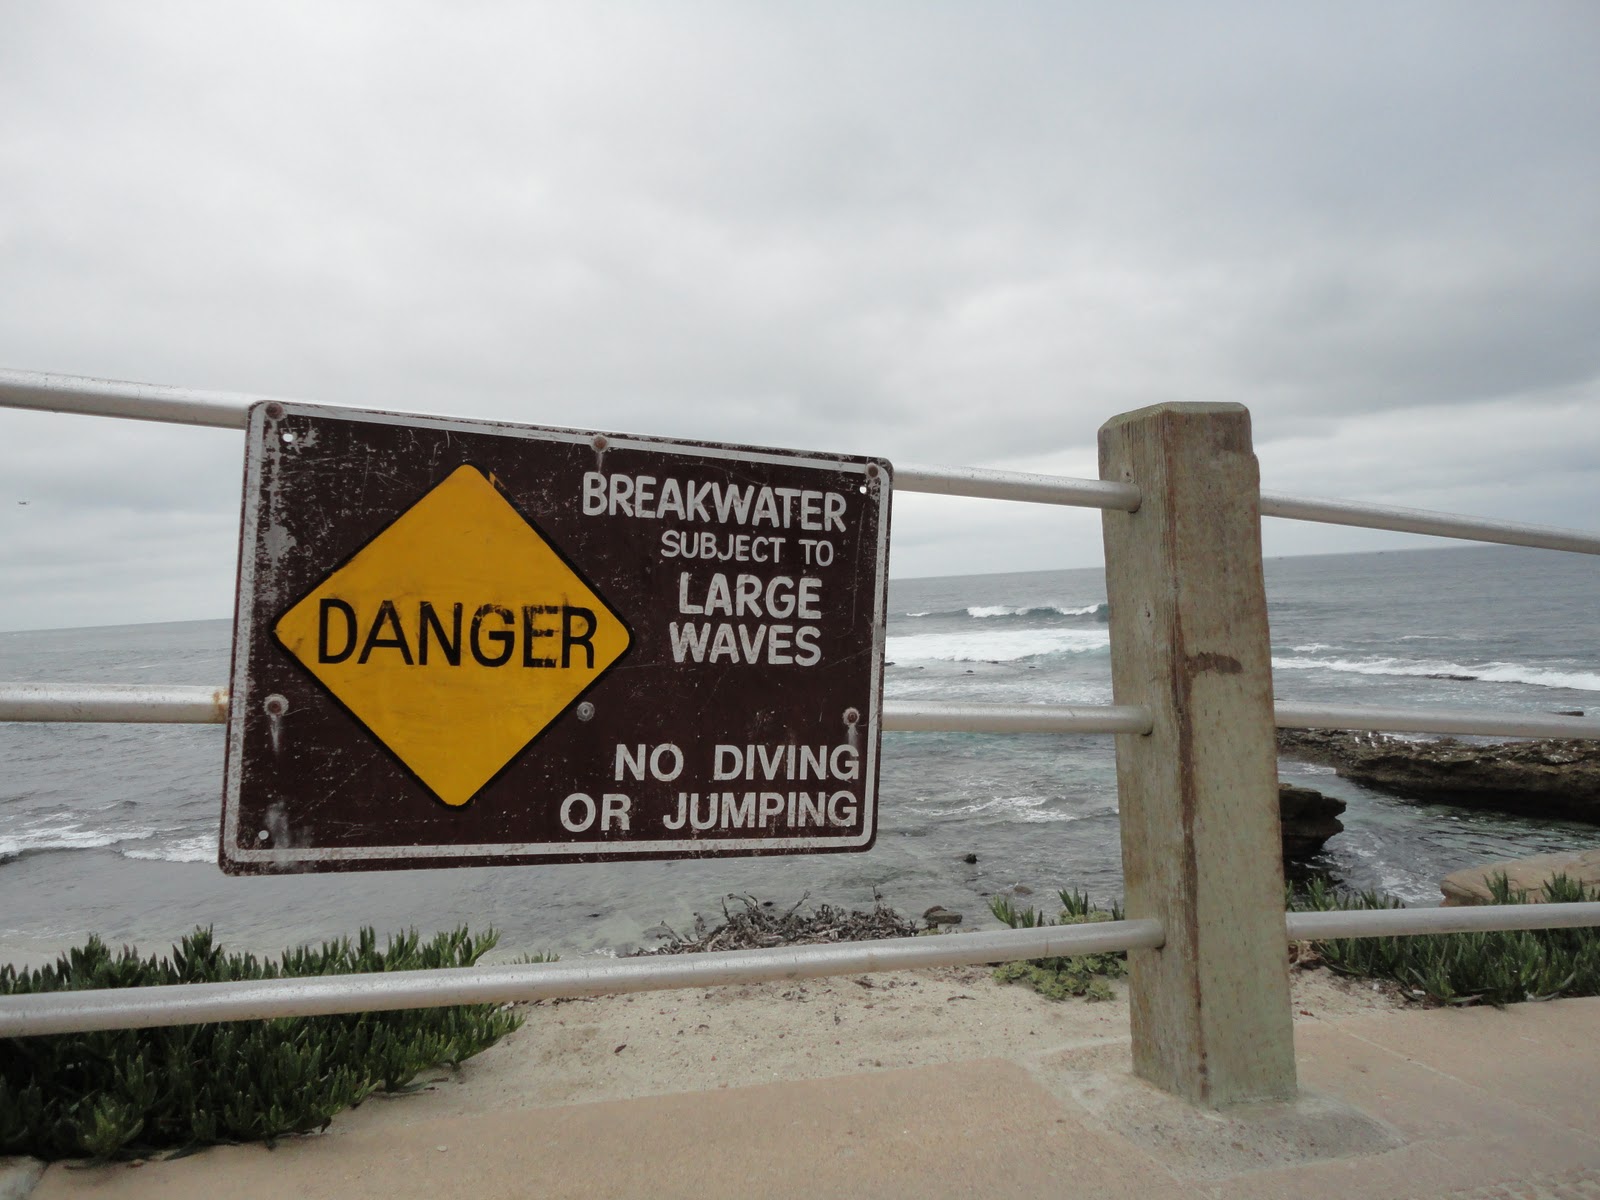 Sign says BREAKWATER SUBJECT TO LARGE WAVES NO DIVING OR JUMPING